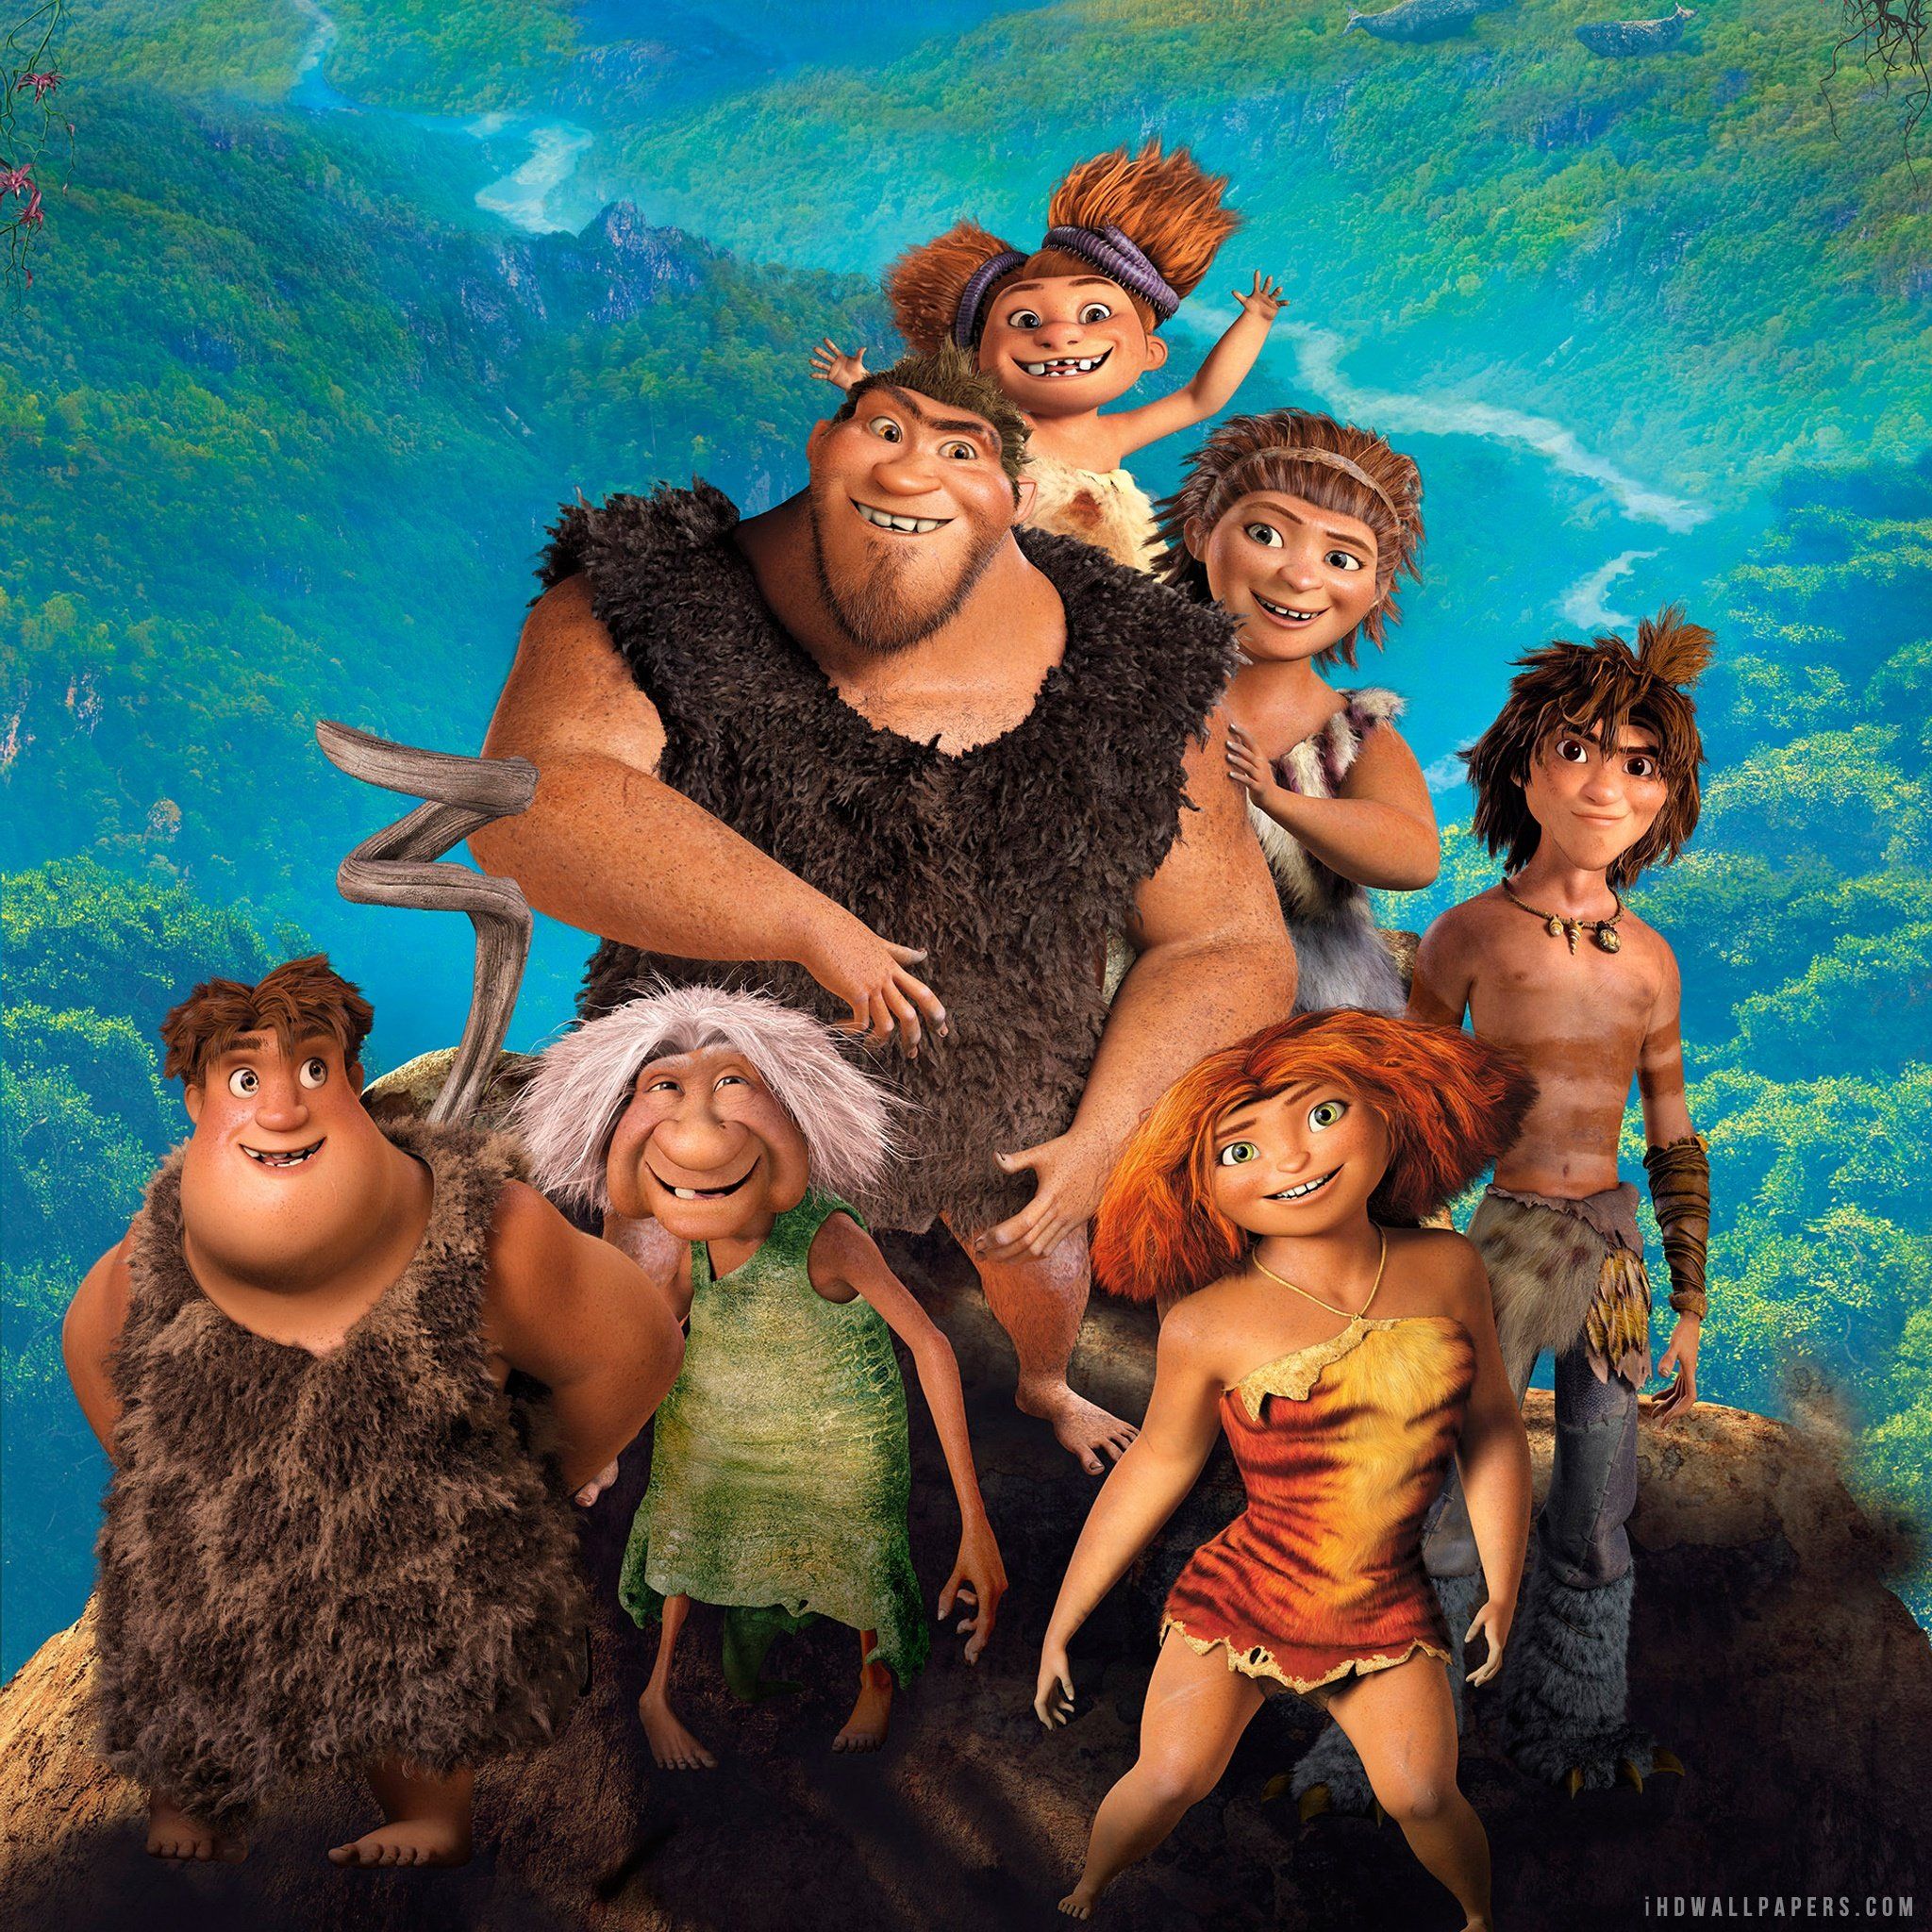 THE CROODS Animation Adventure comedy family fantasy 1croods wallpapers.